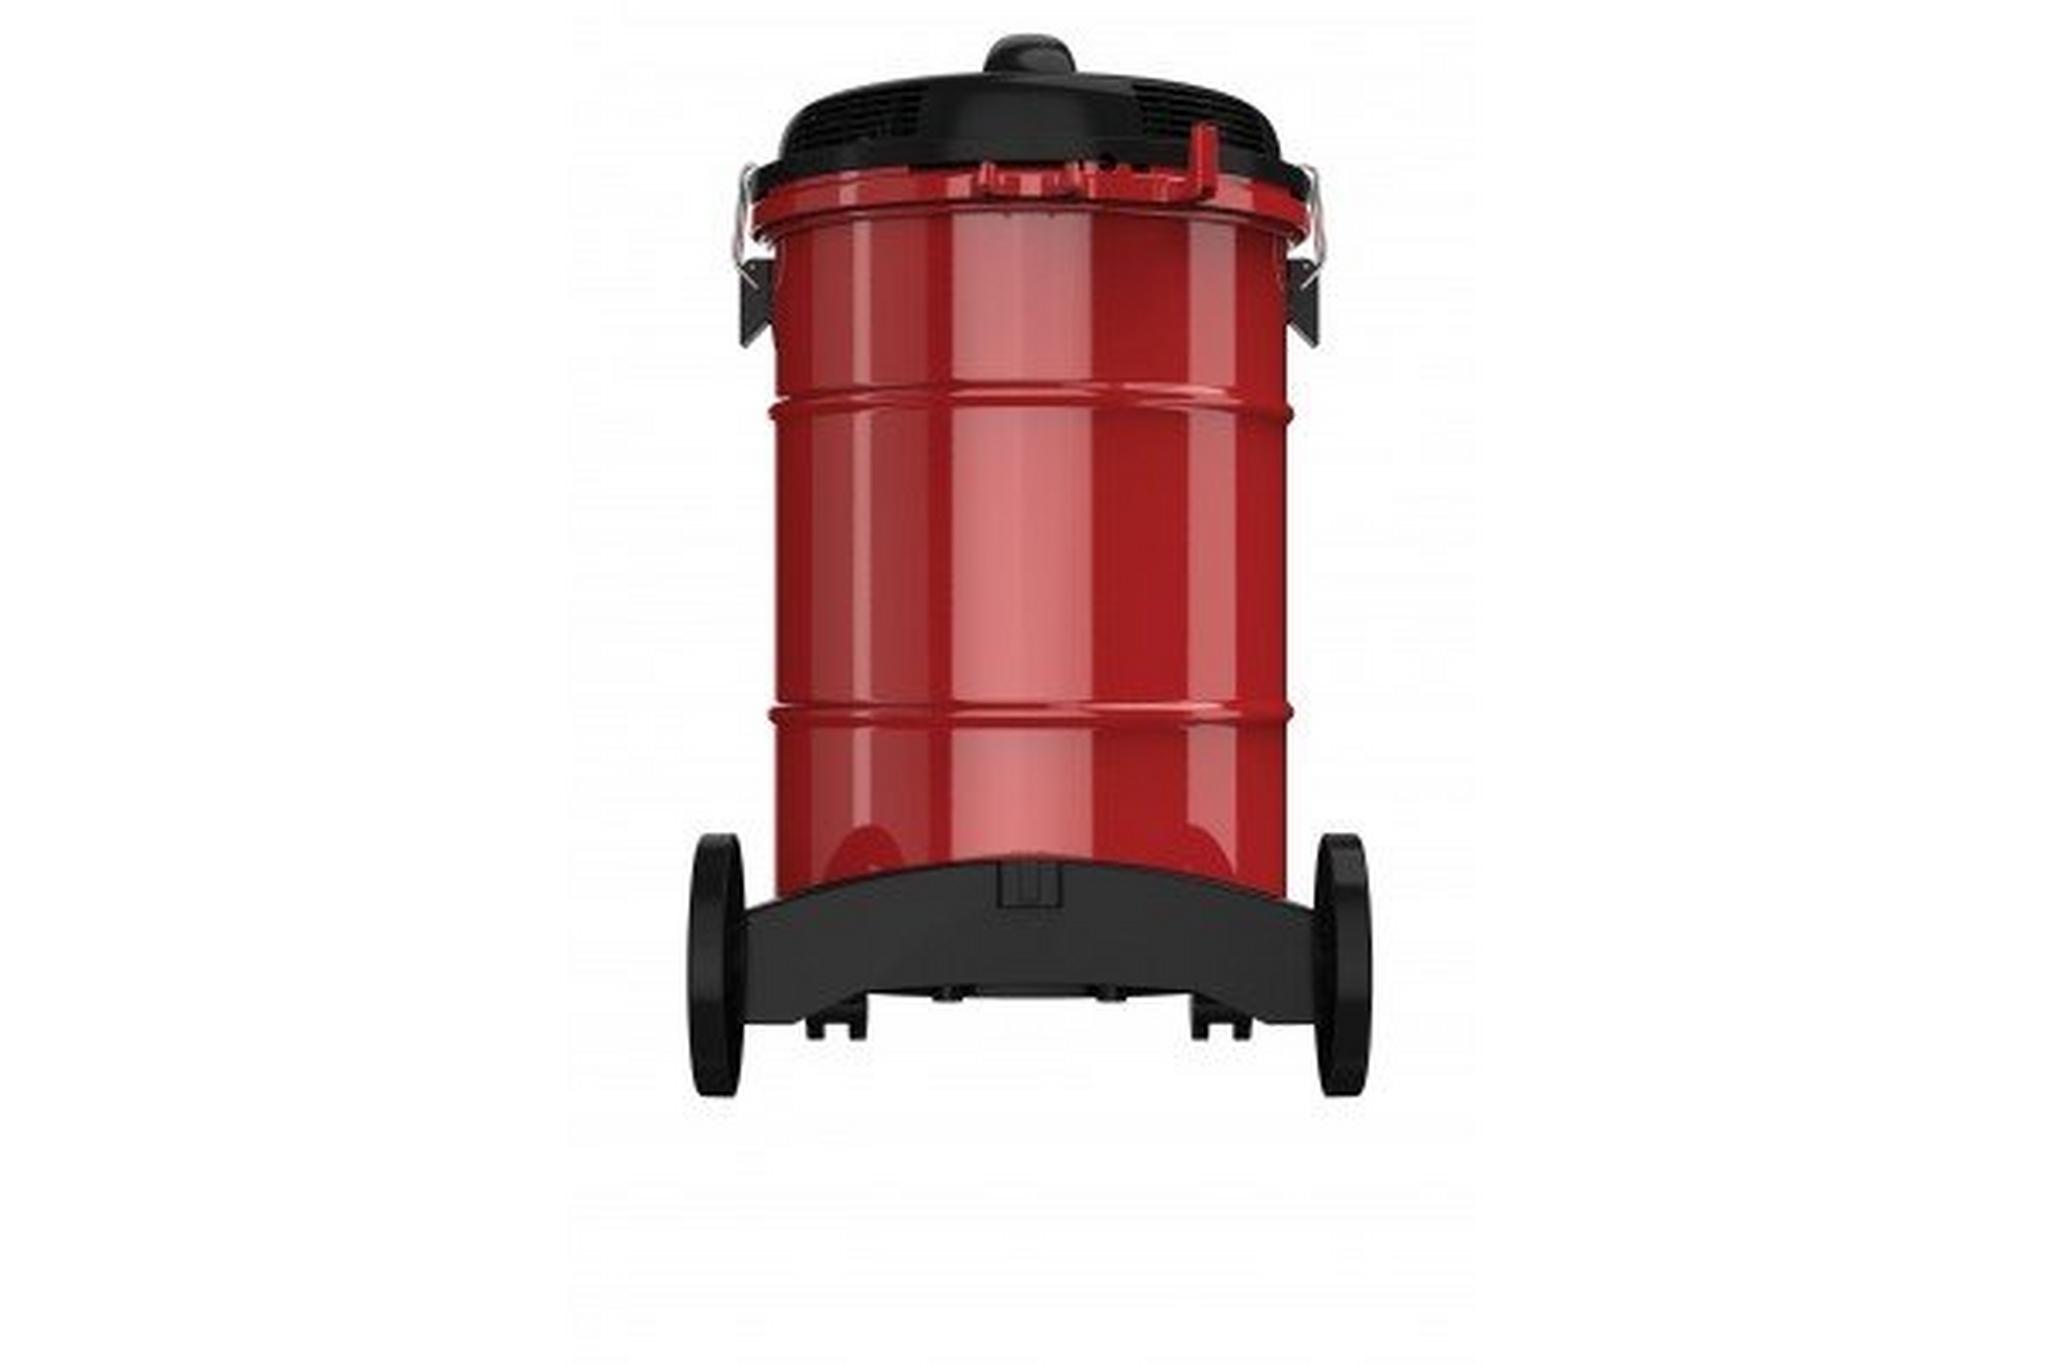 Hoover 1900W Drum Type Vacuum Cleaner - Red HT87-T1-S